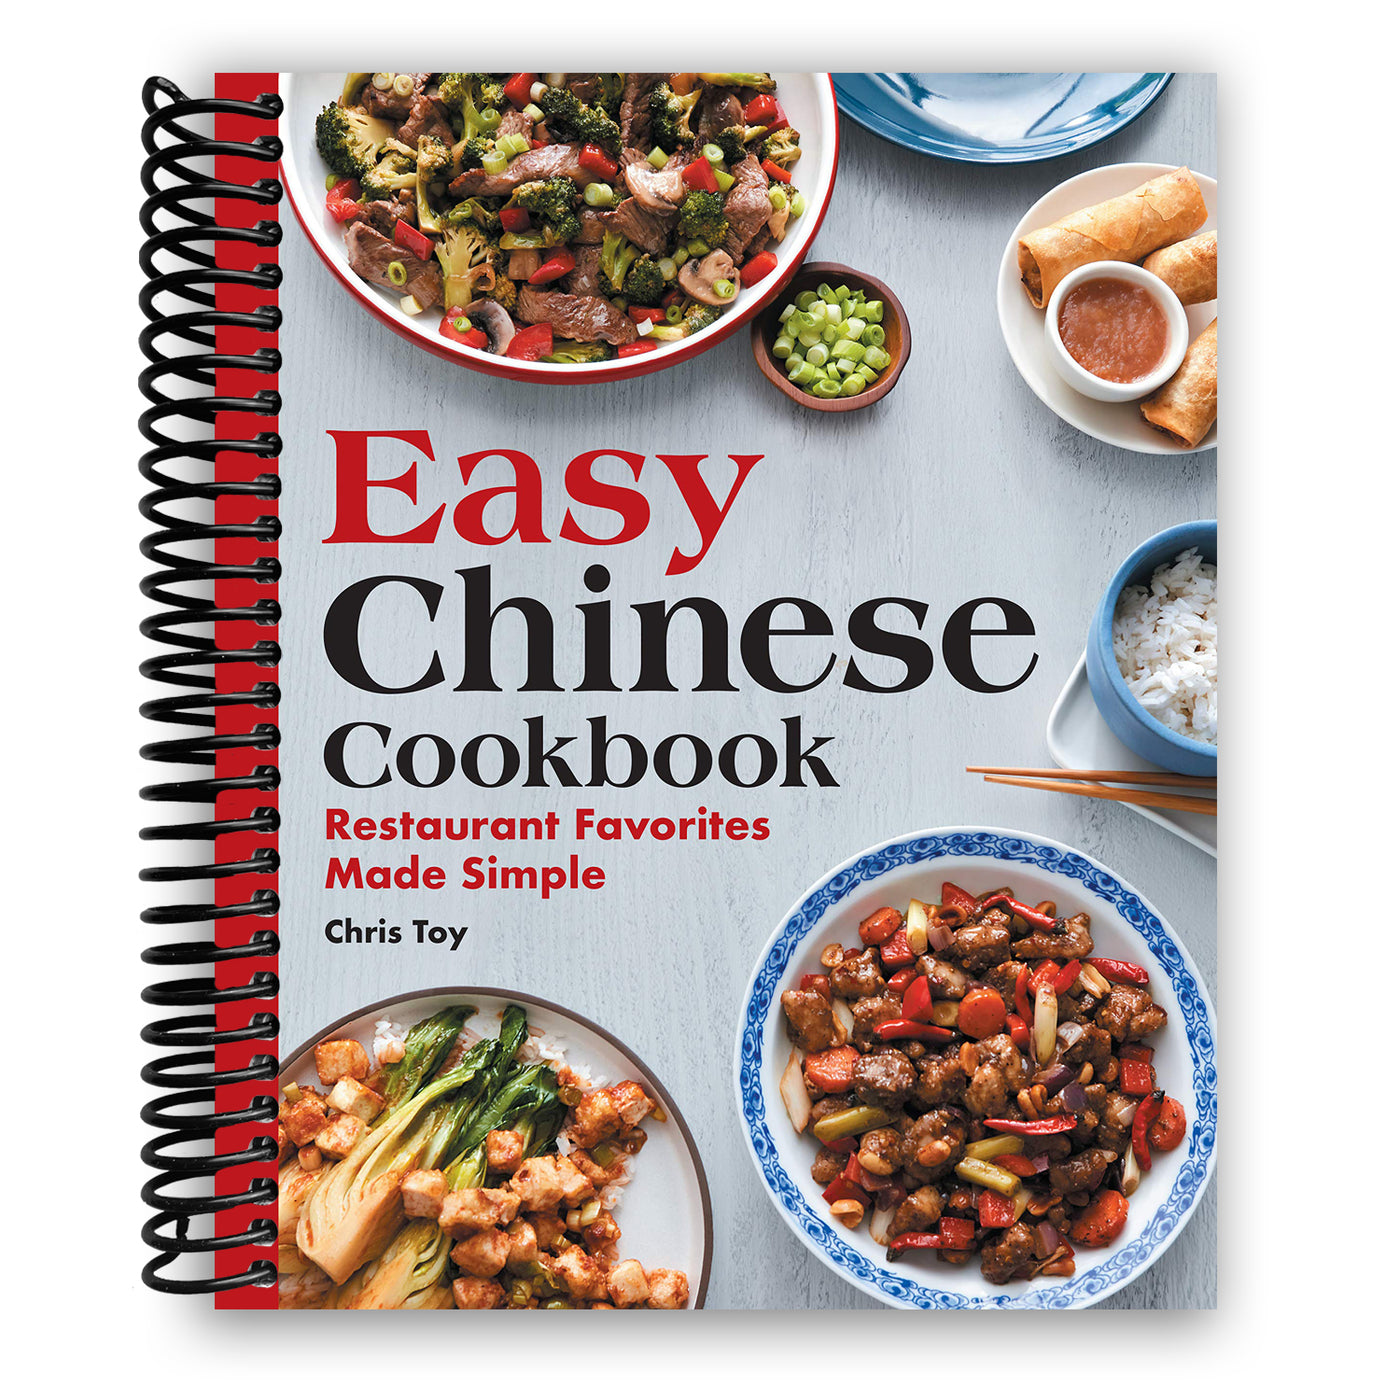 Easy Chinese Cookbook: Restaurant Favorites Made Simple (Spiral Bound)